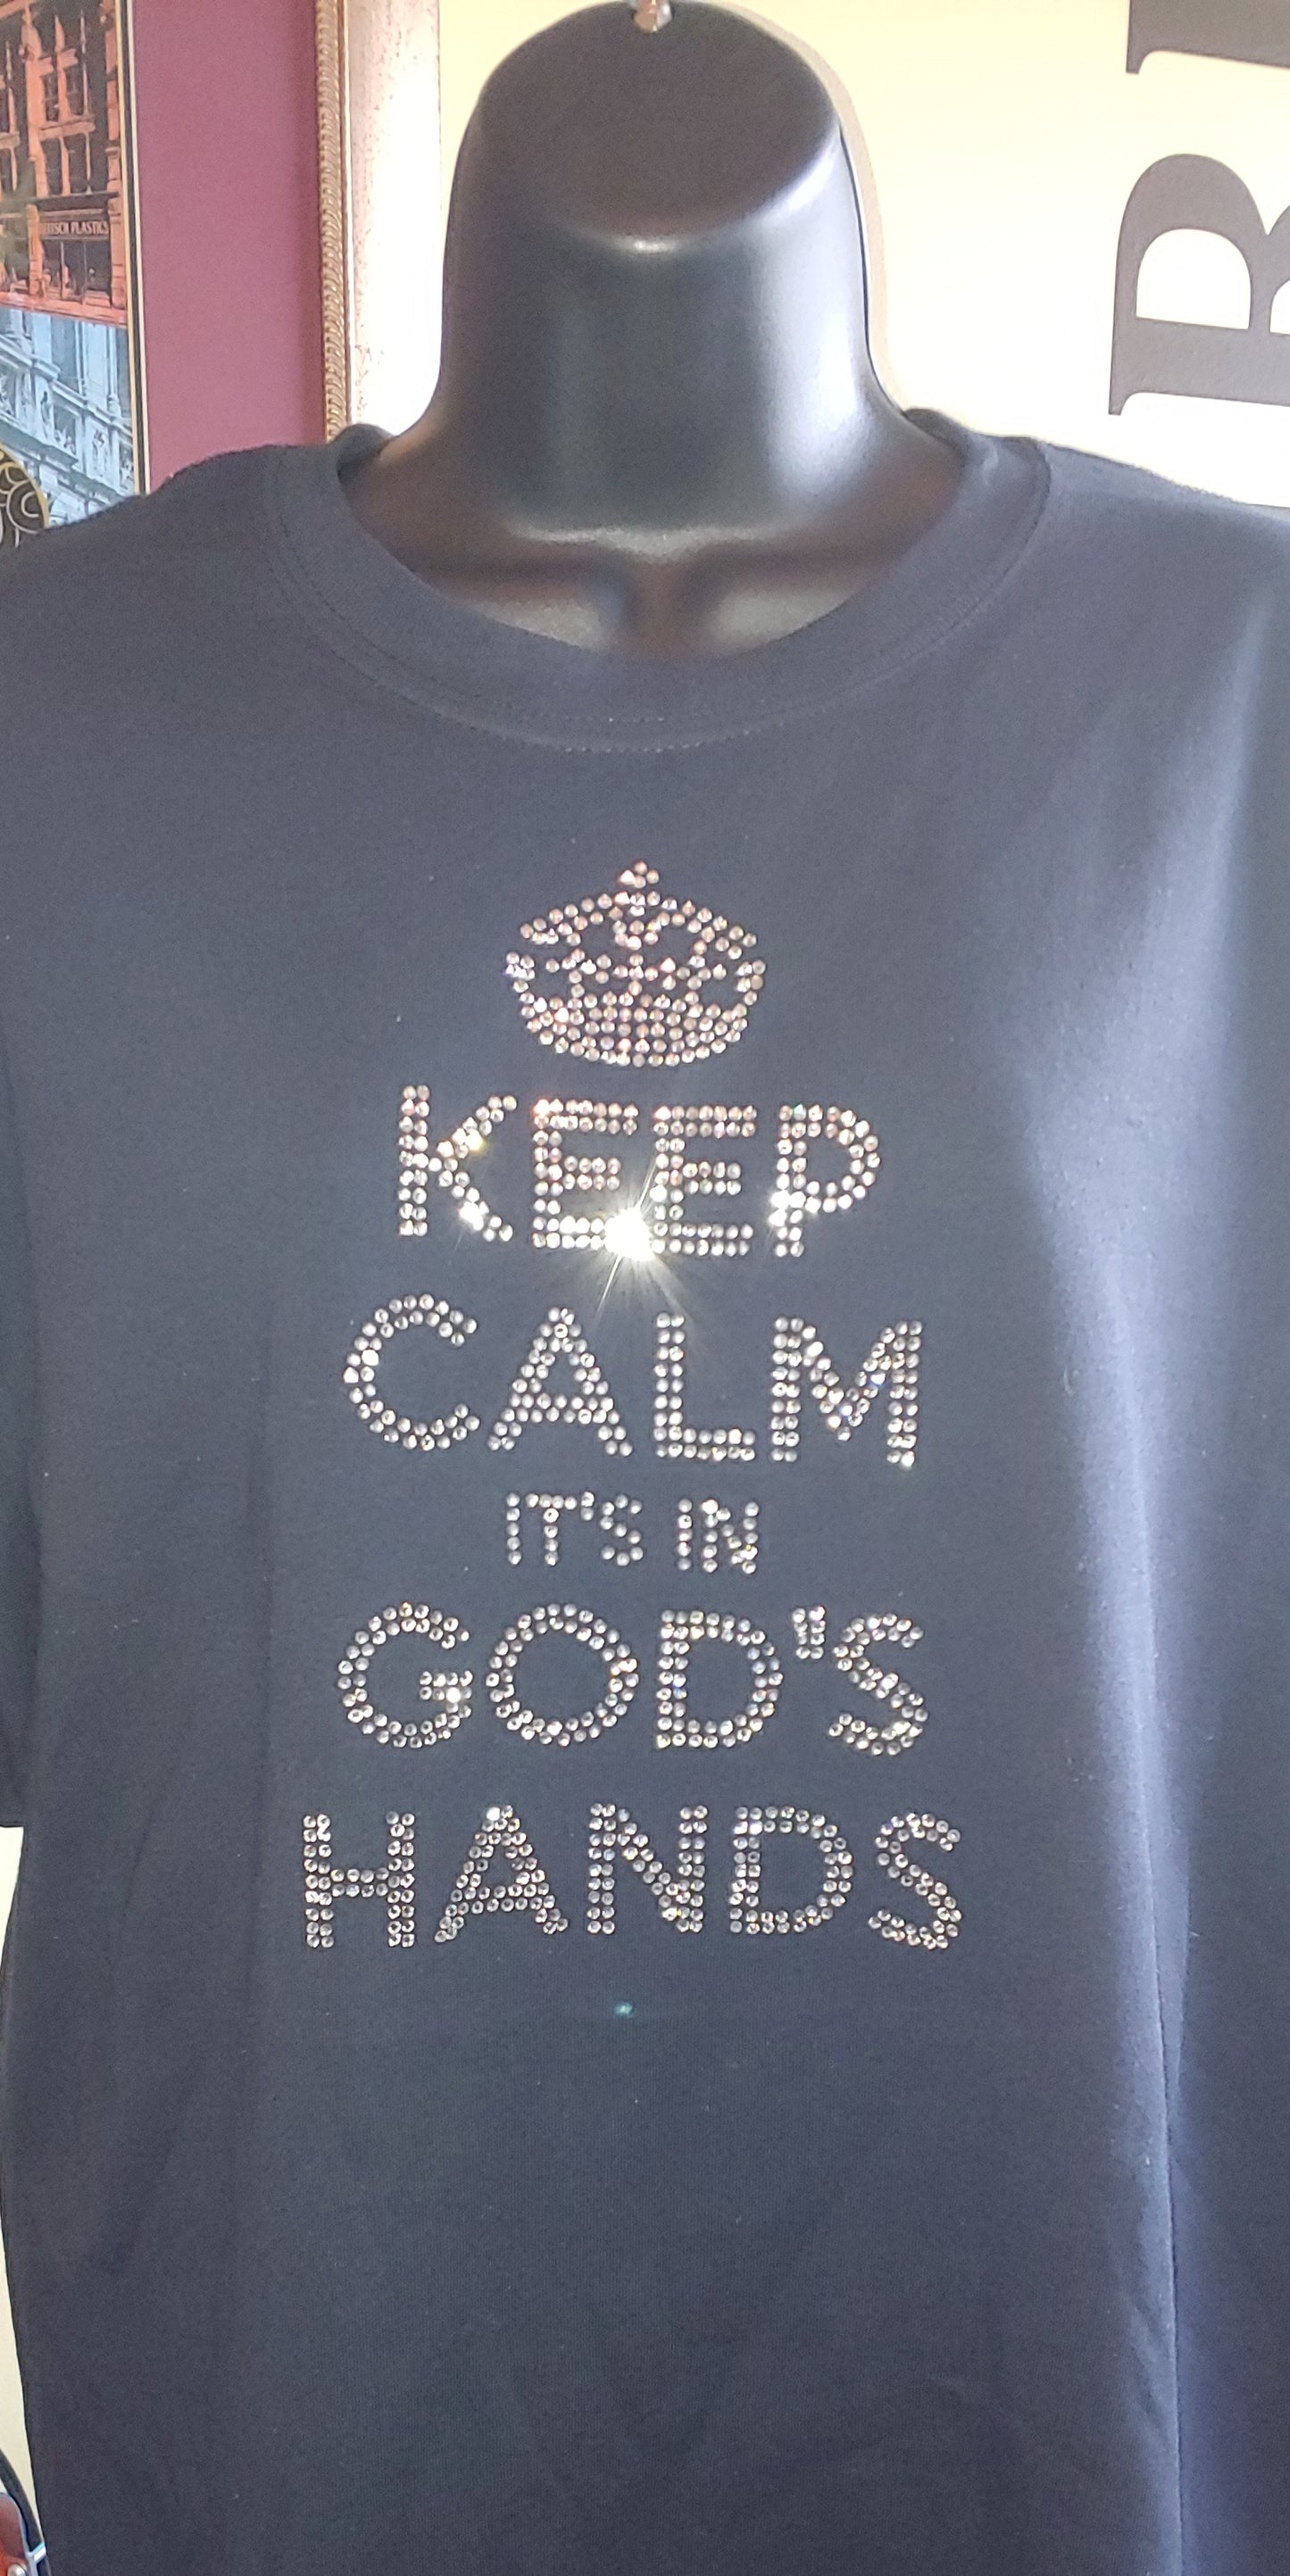 Keep Calm It's In God's Hands - Size Large